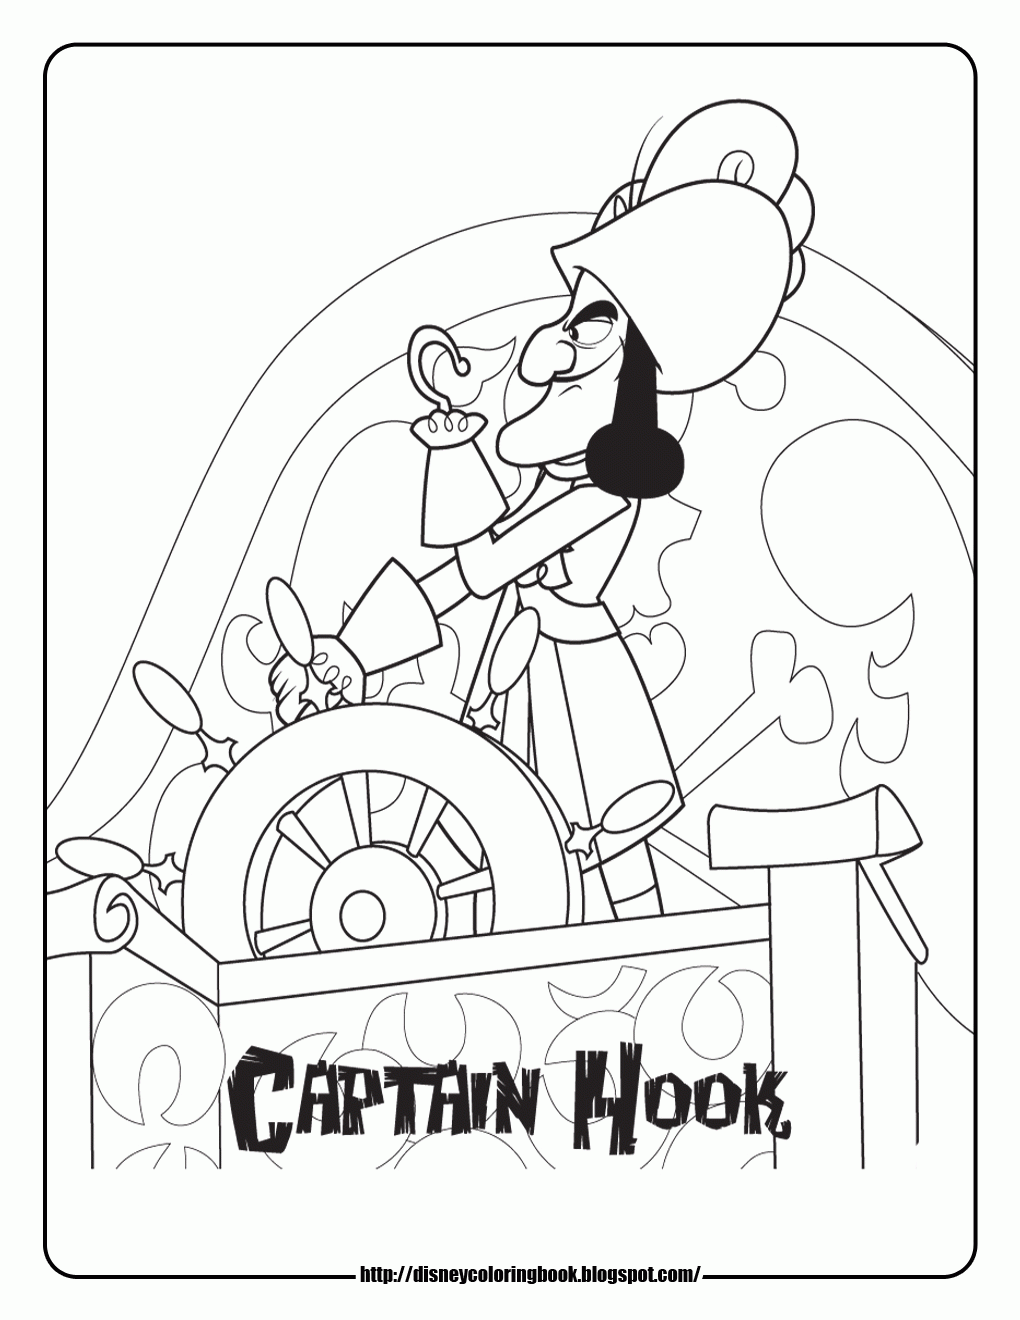 Jake and the Neverland Pirates 2: Free Disney Coloring Sheets | Team colors